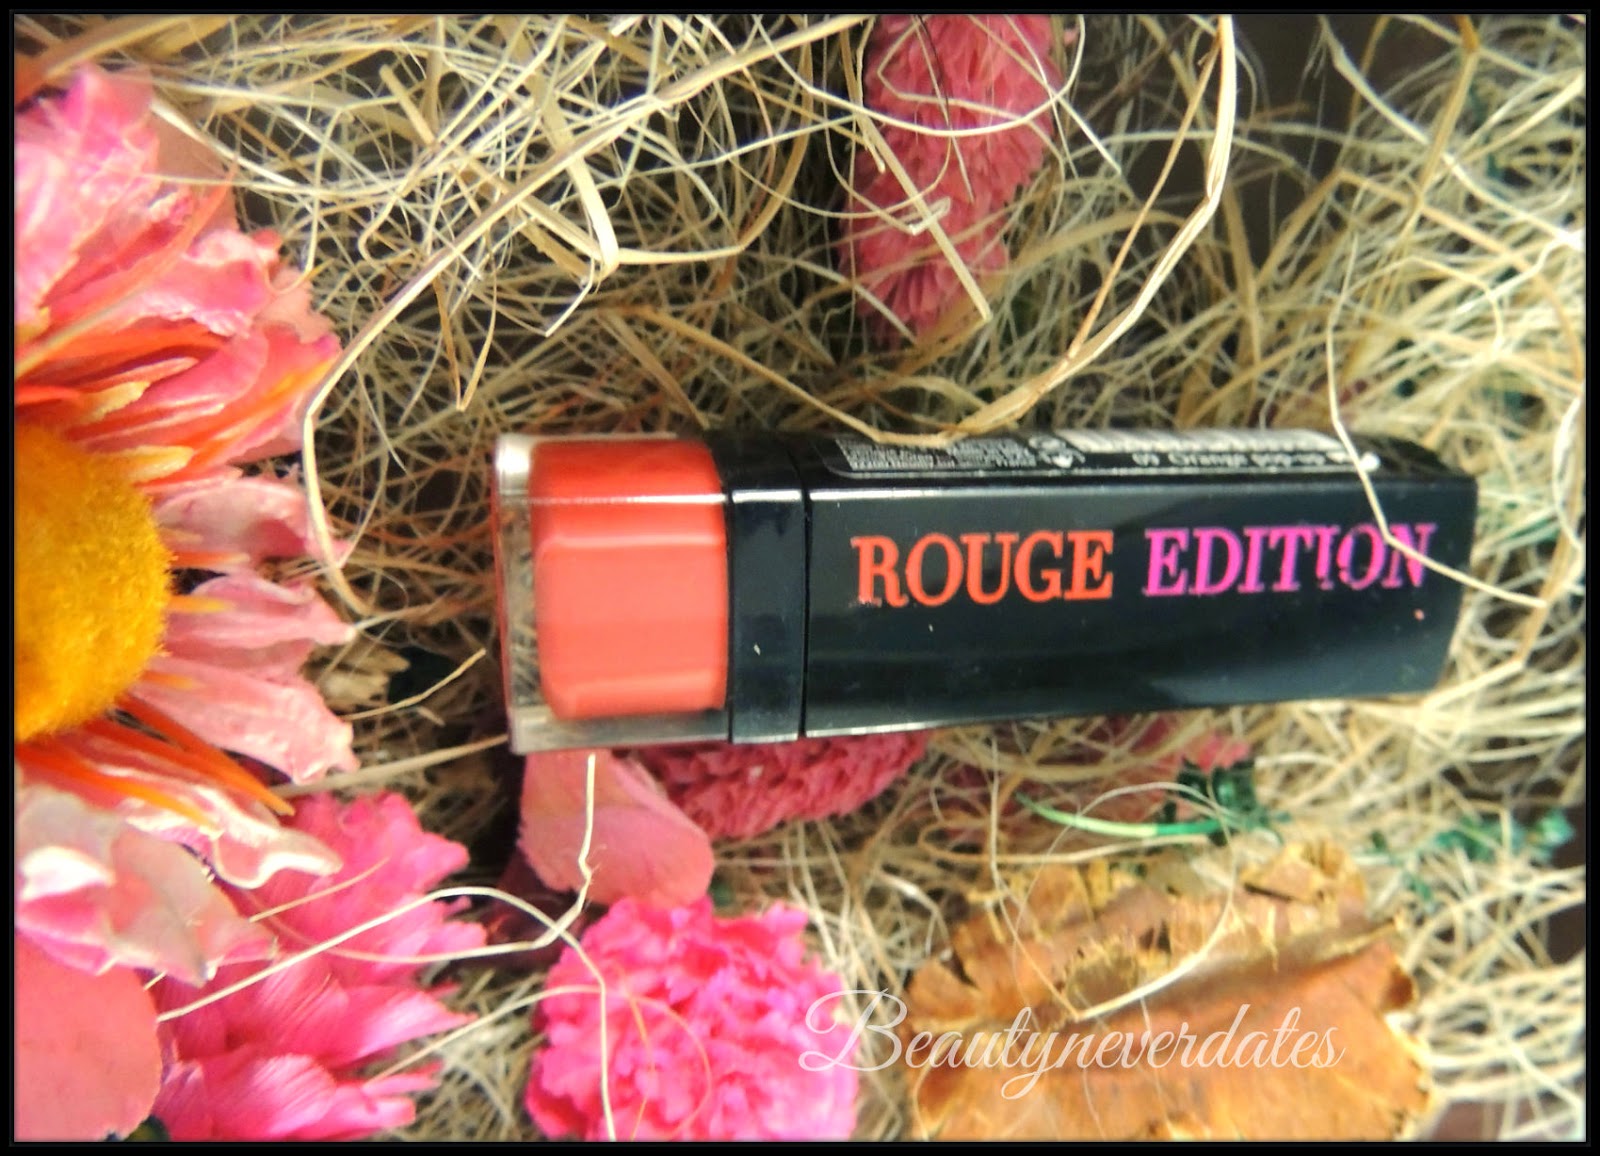 Bourjois Rouge Edition Lipstick - Orange Pop up Review and Swatches 